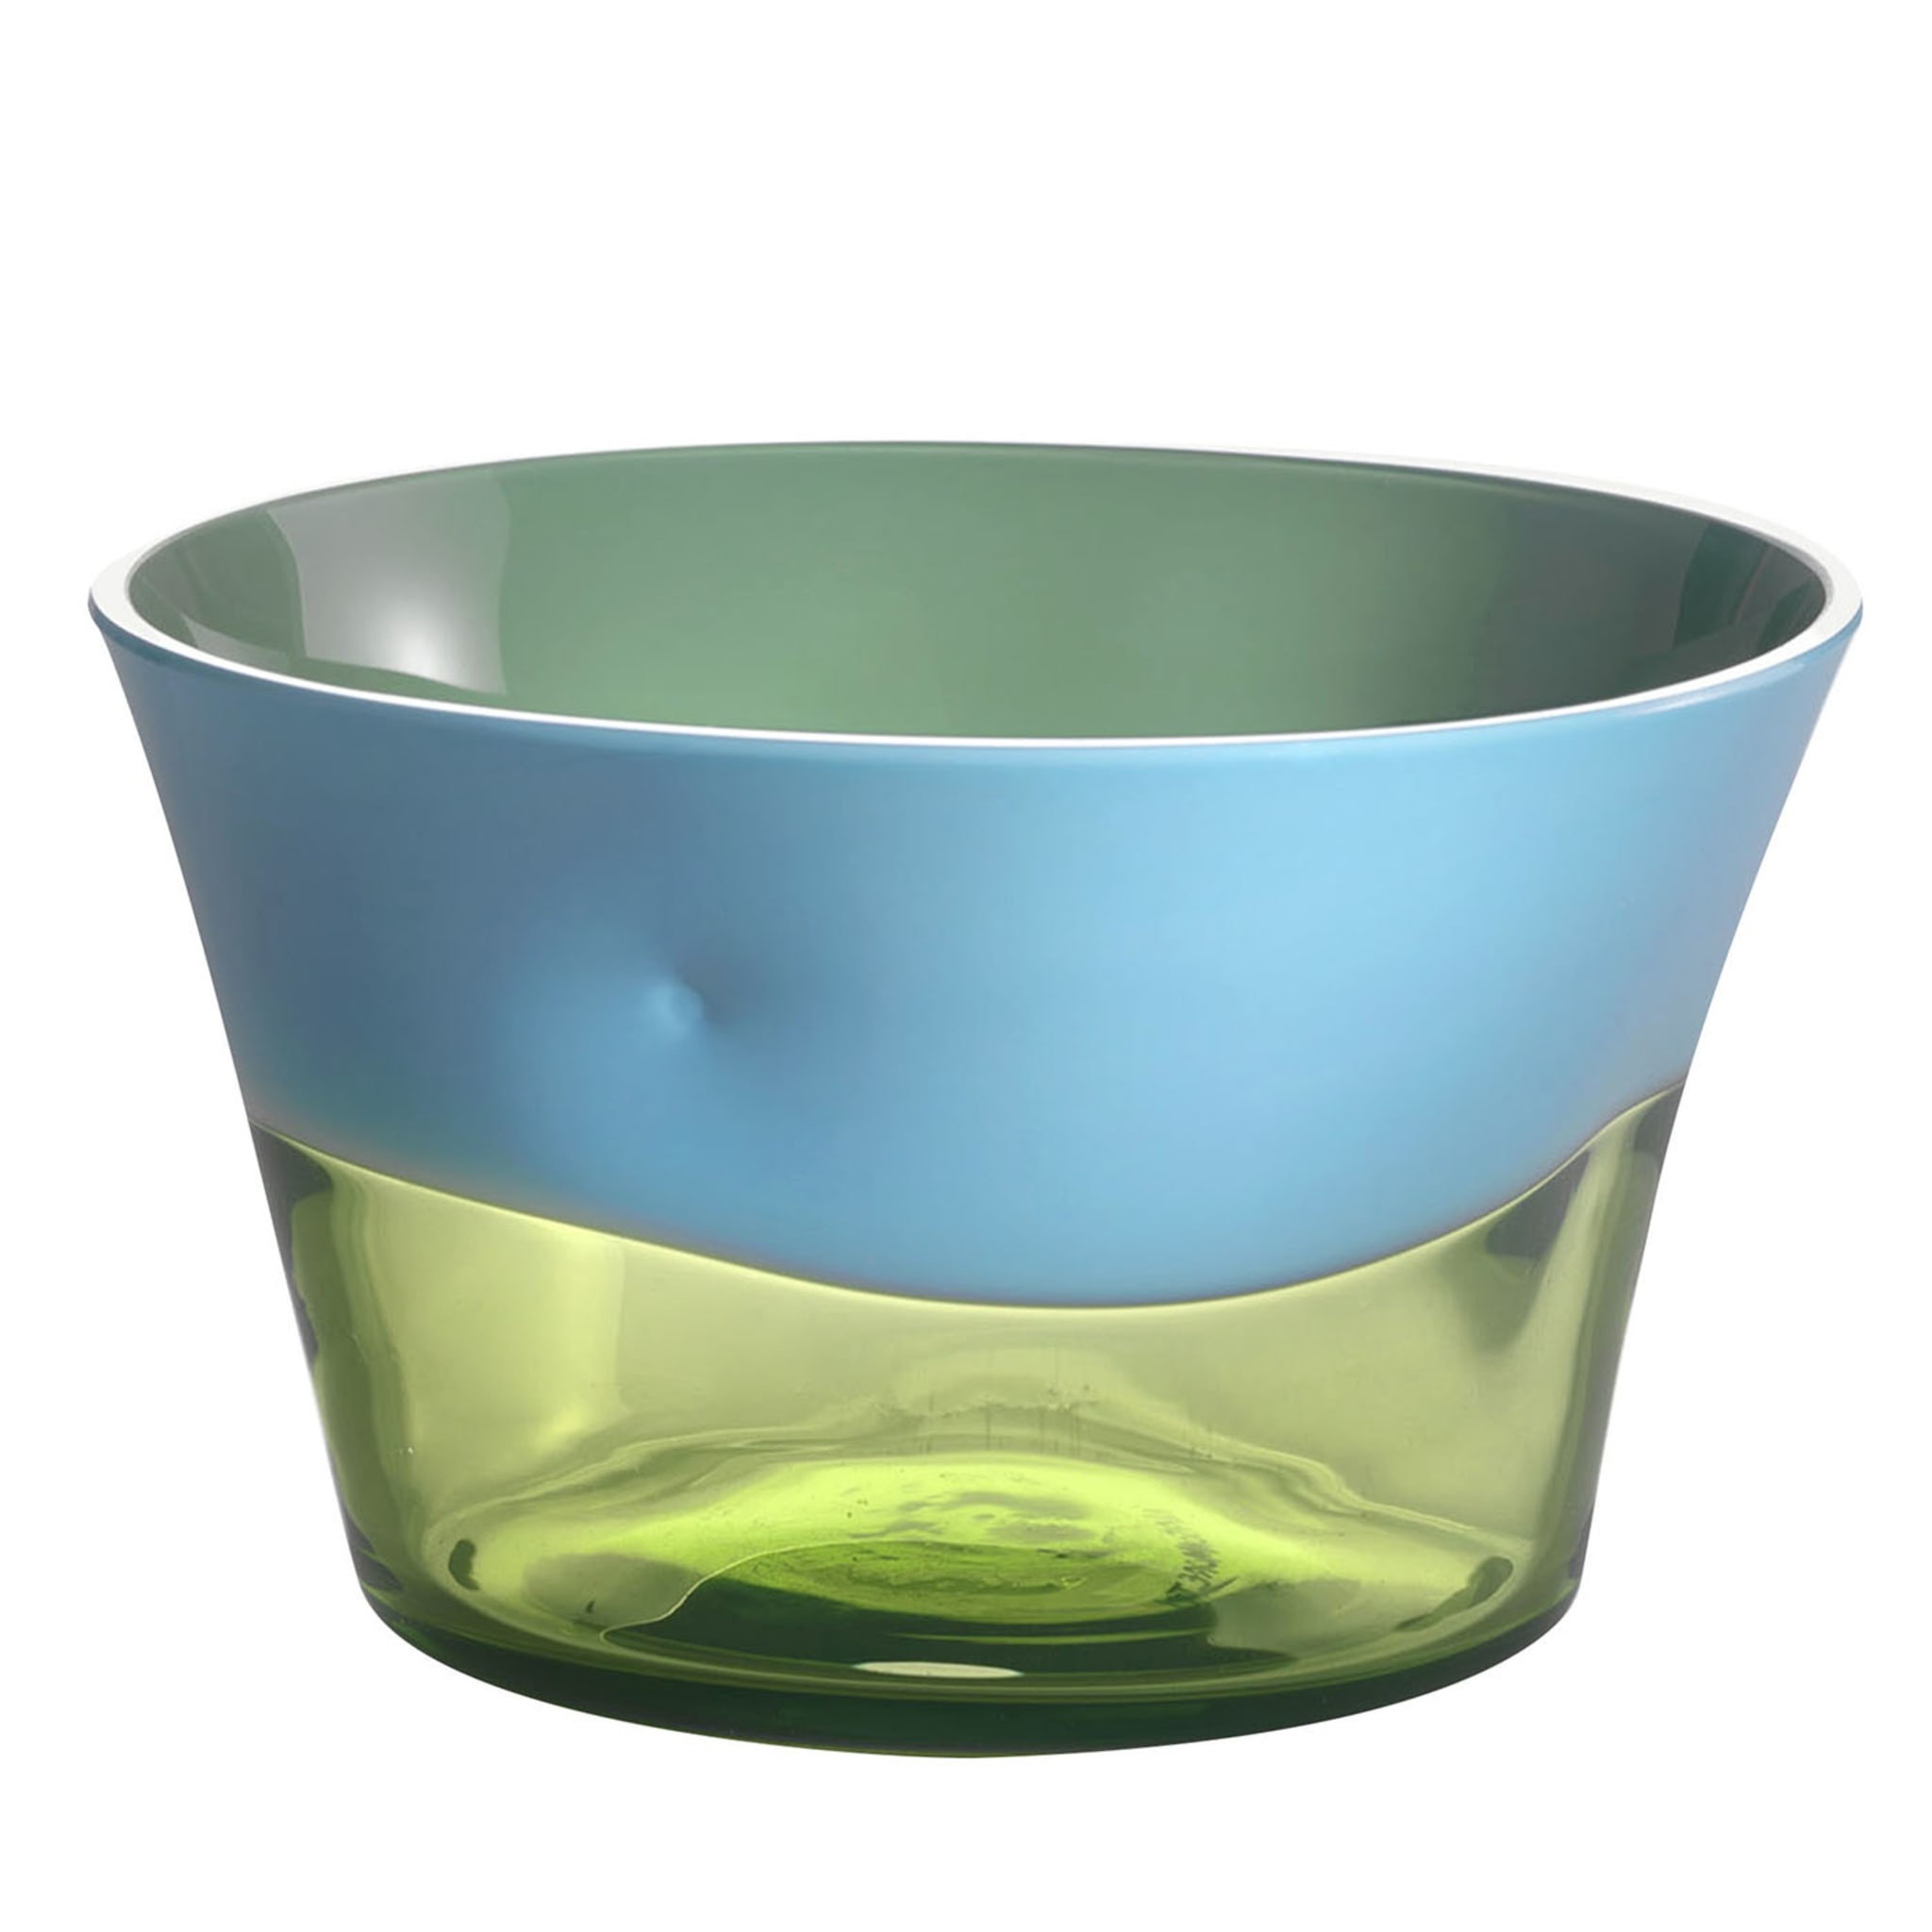 Dandy Small Light-Blue & Green Bowl by Stefano Marcato - Main view